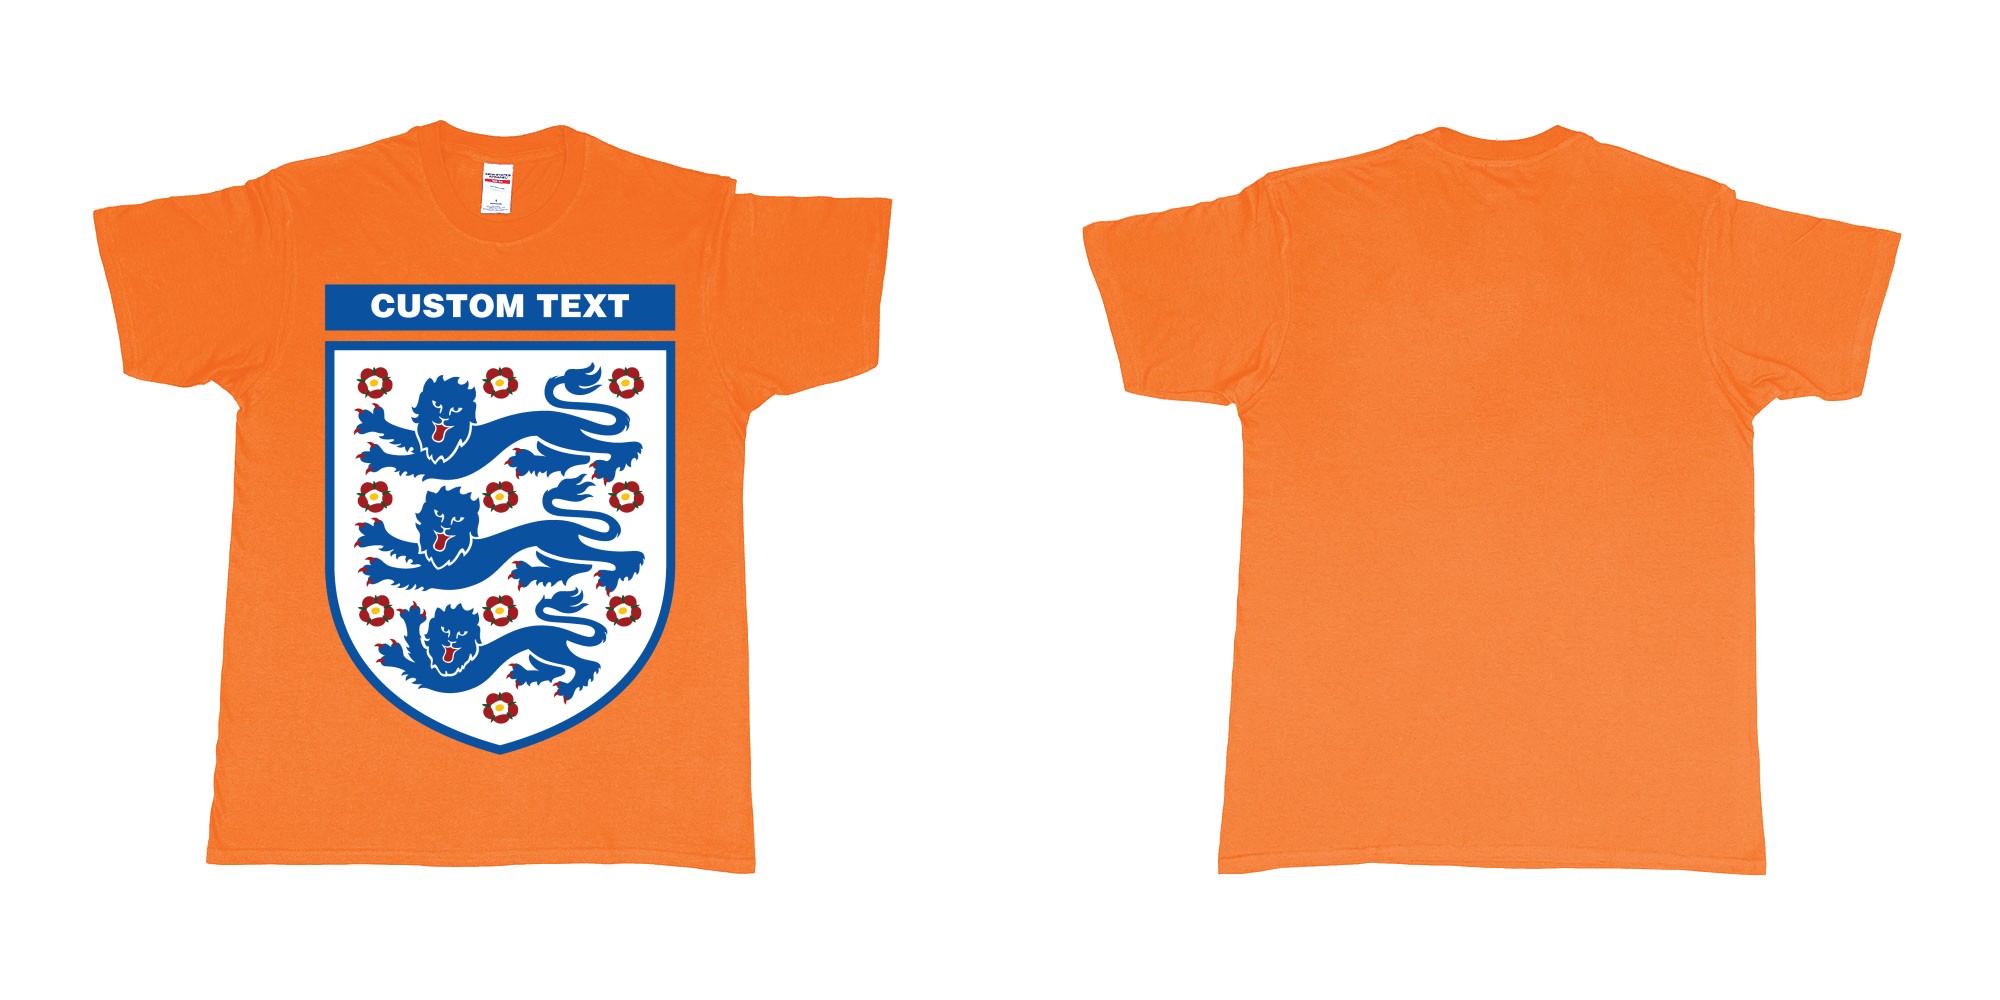 Custom tshirt design england national football team logo in fabric color orange choice your own text made in Bali by The Pirate Way